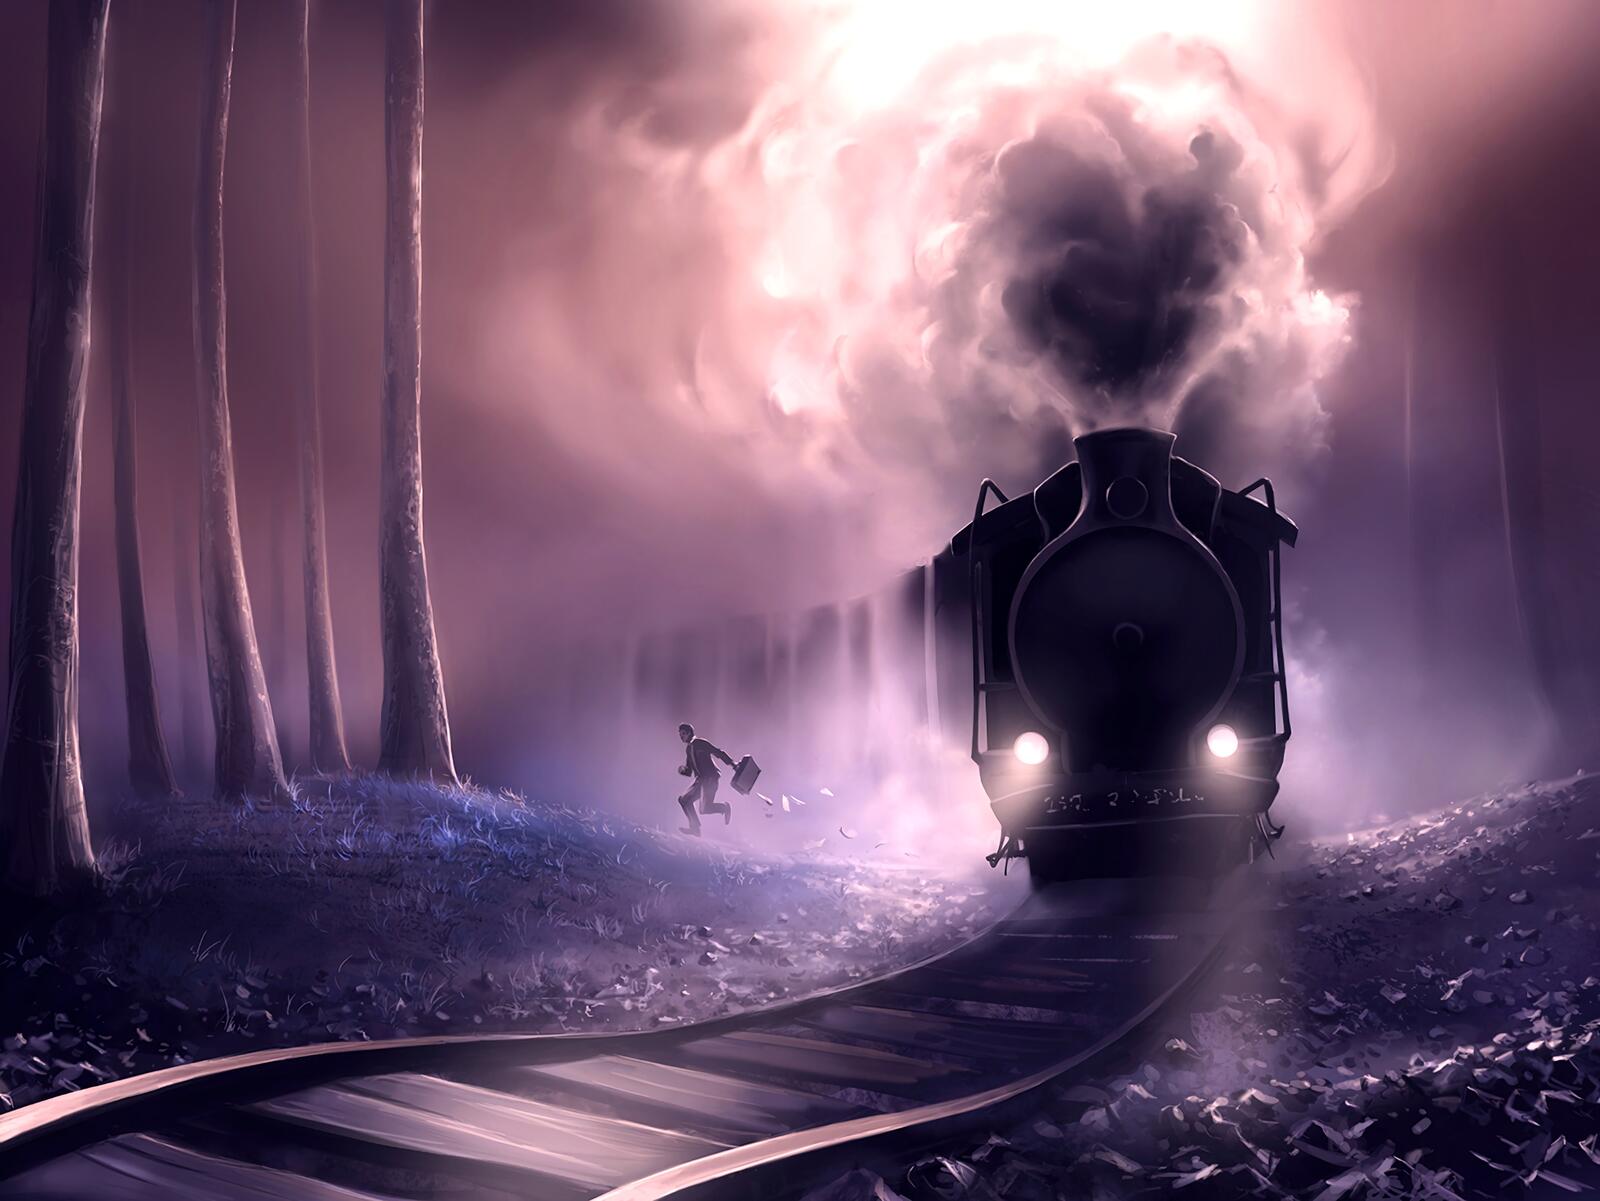 Wallpapers train steam train grimly on the desktop